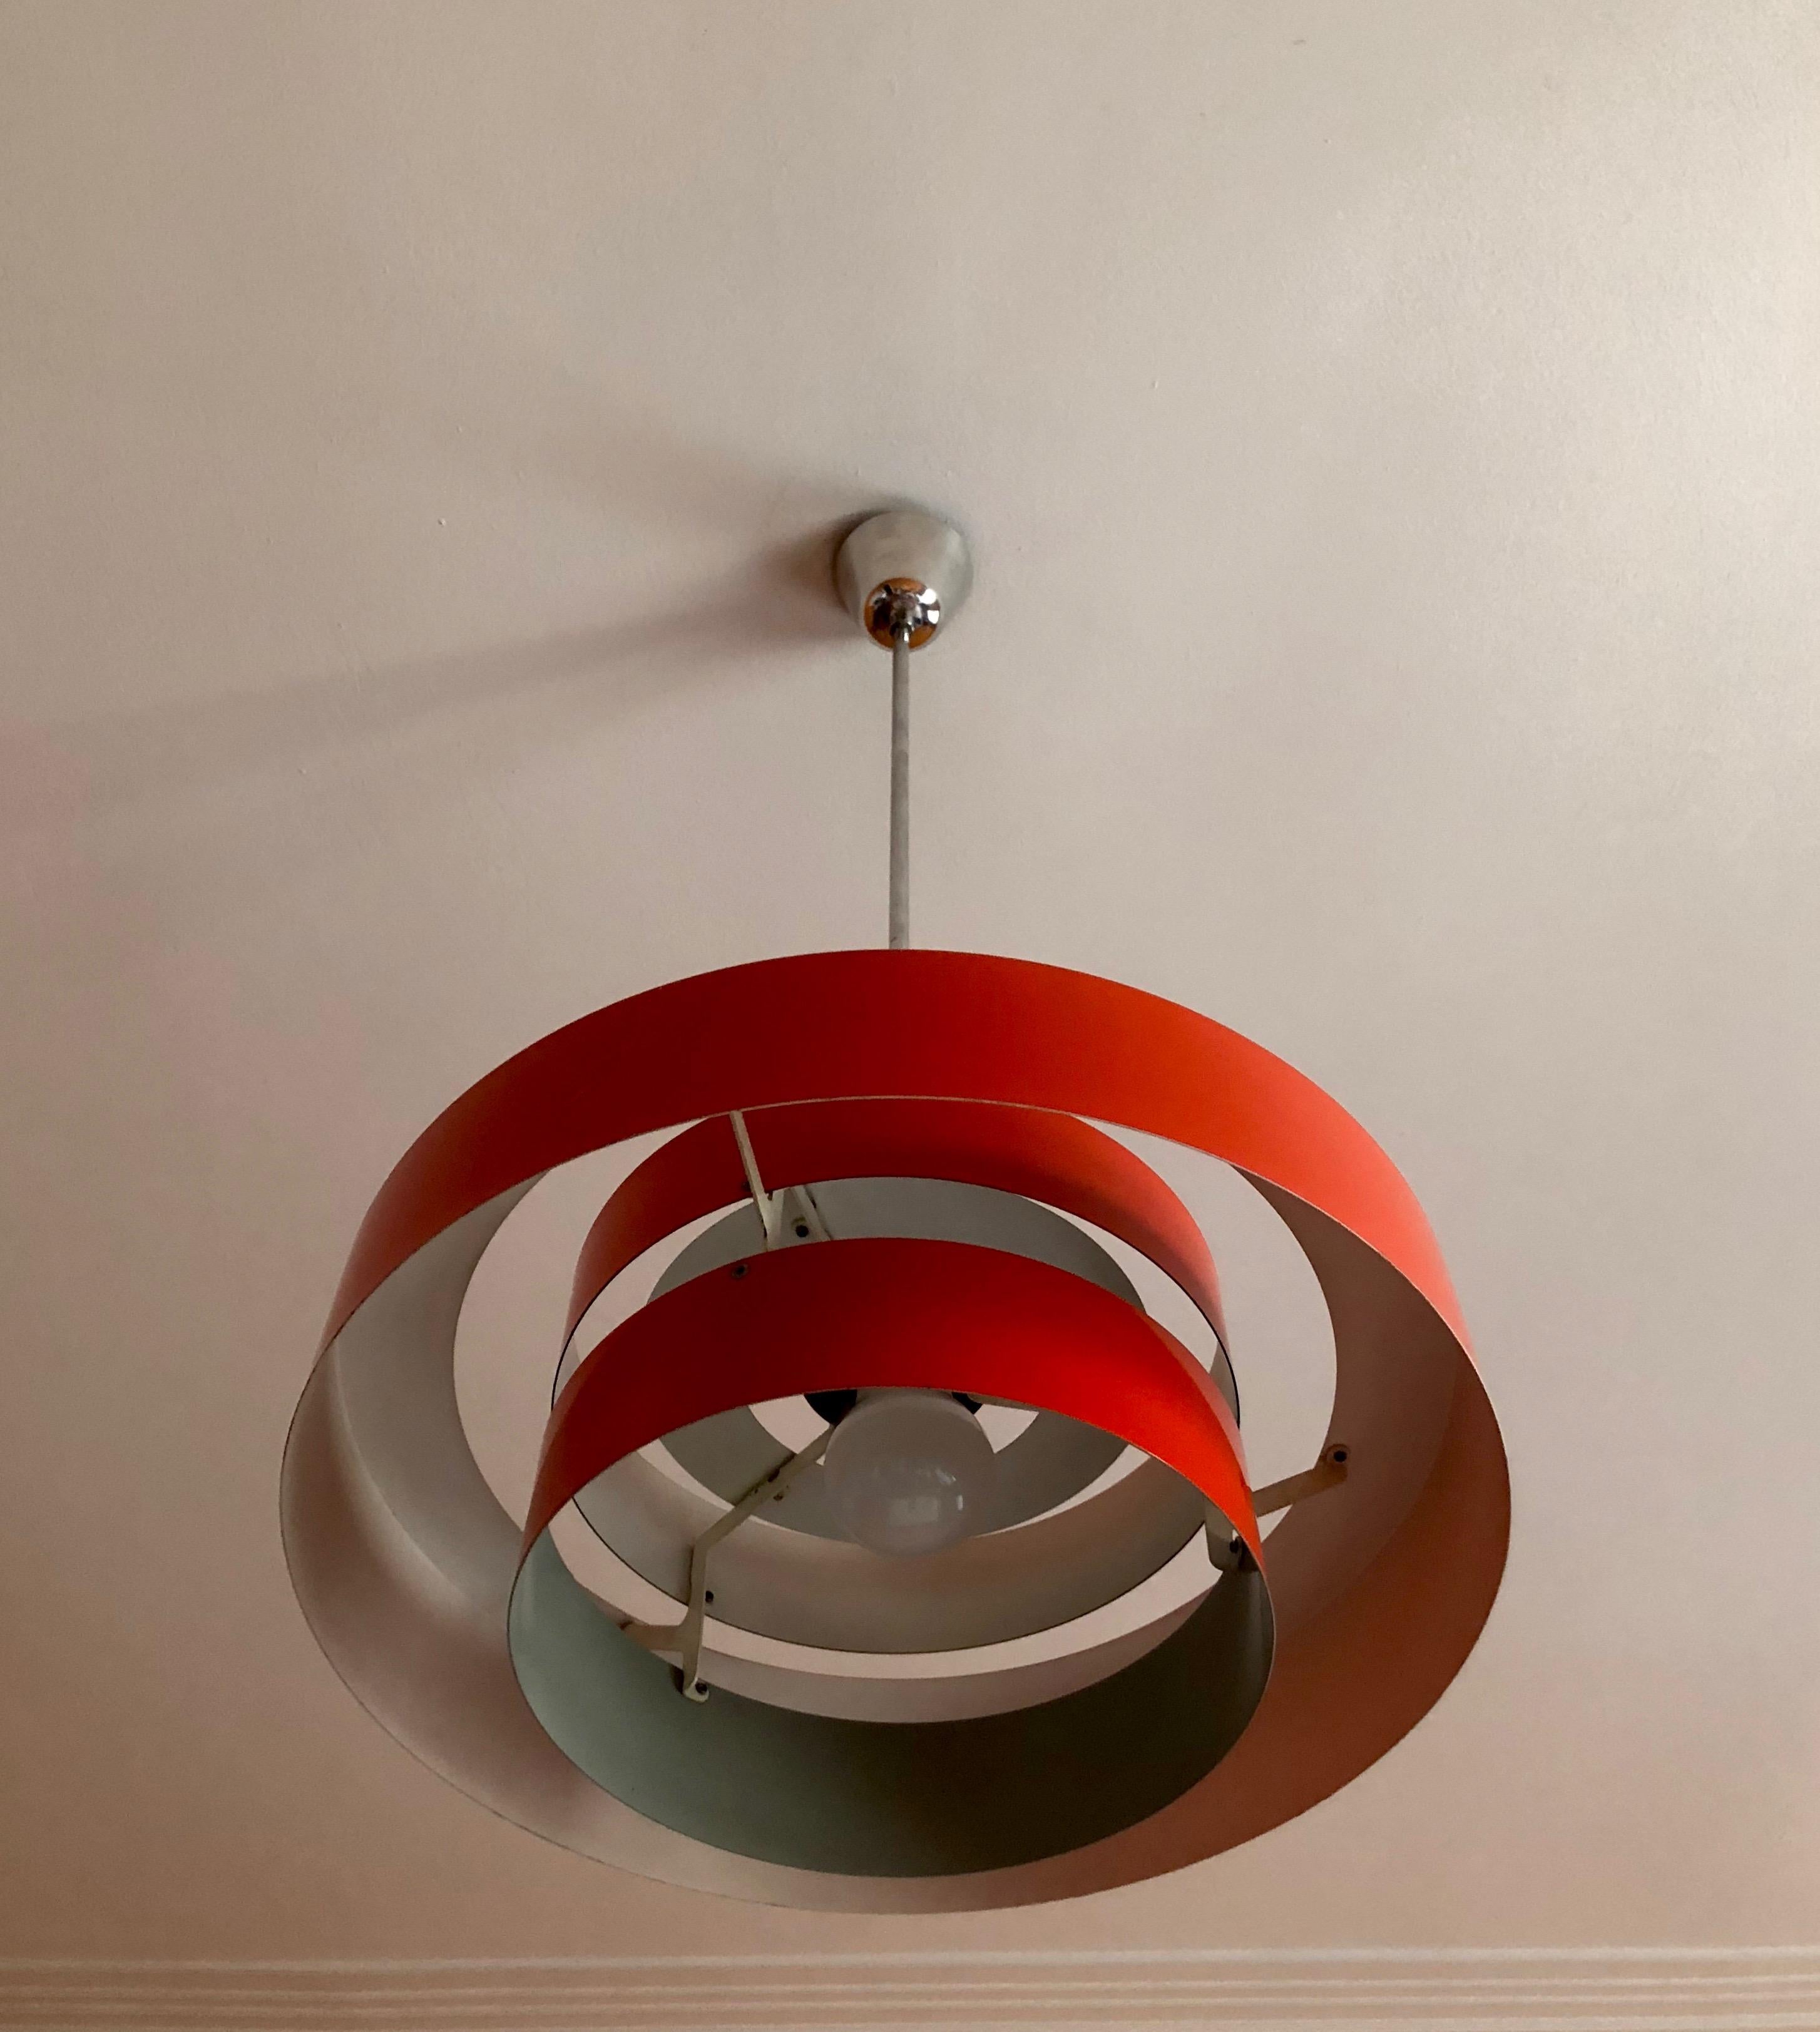 The equator, is a bright red pendant lamp, with a Space Age design. It is composed of two inner rings surrounded by a larger outer ring and a cylinder top. The rings have a white inner coating with the bottom ring featuring a grey coating, that acts